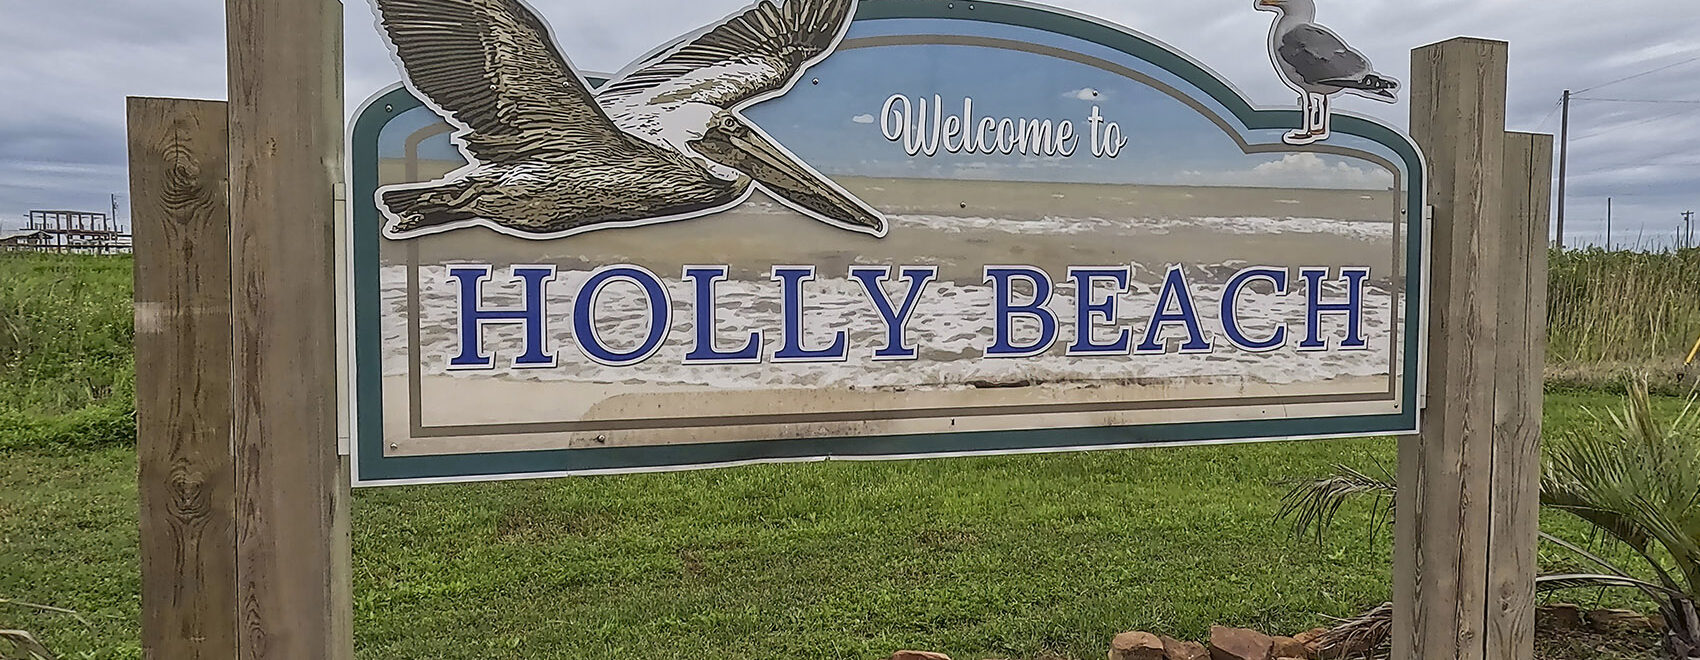 wood sign with pelican and welcome to Holly Beach